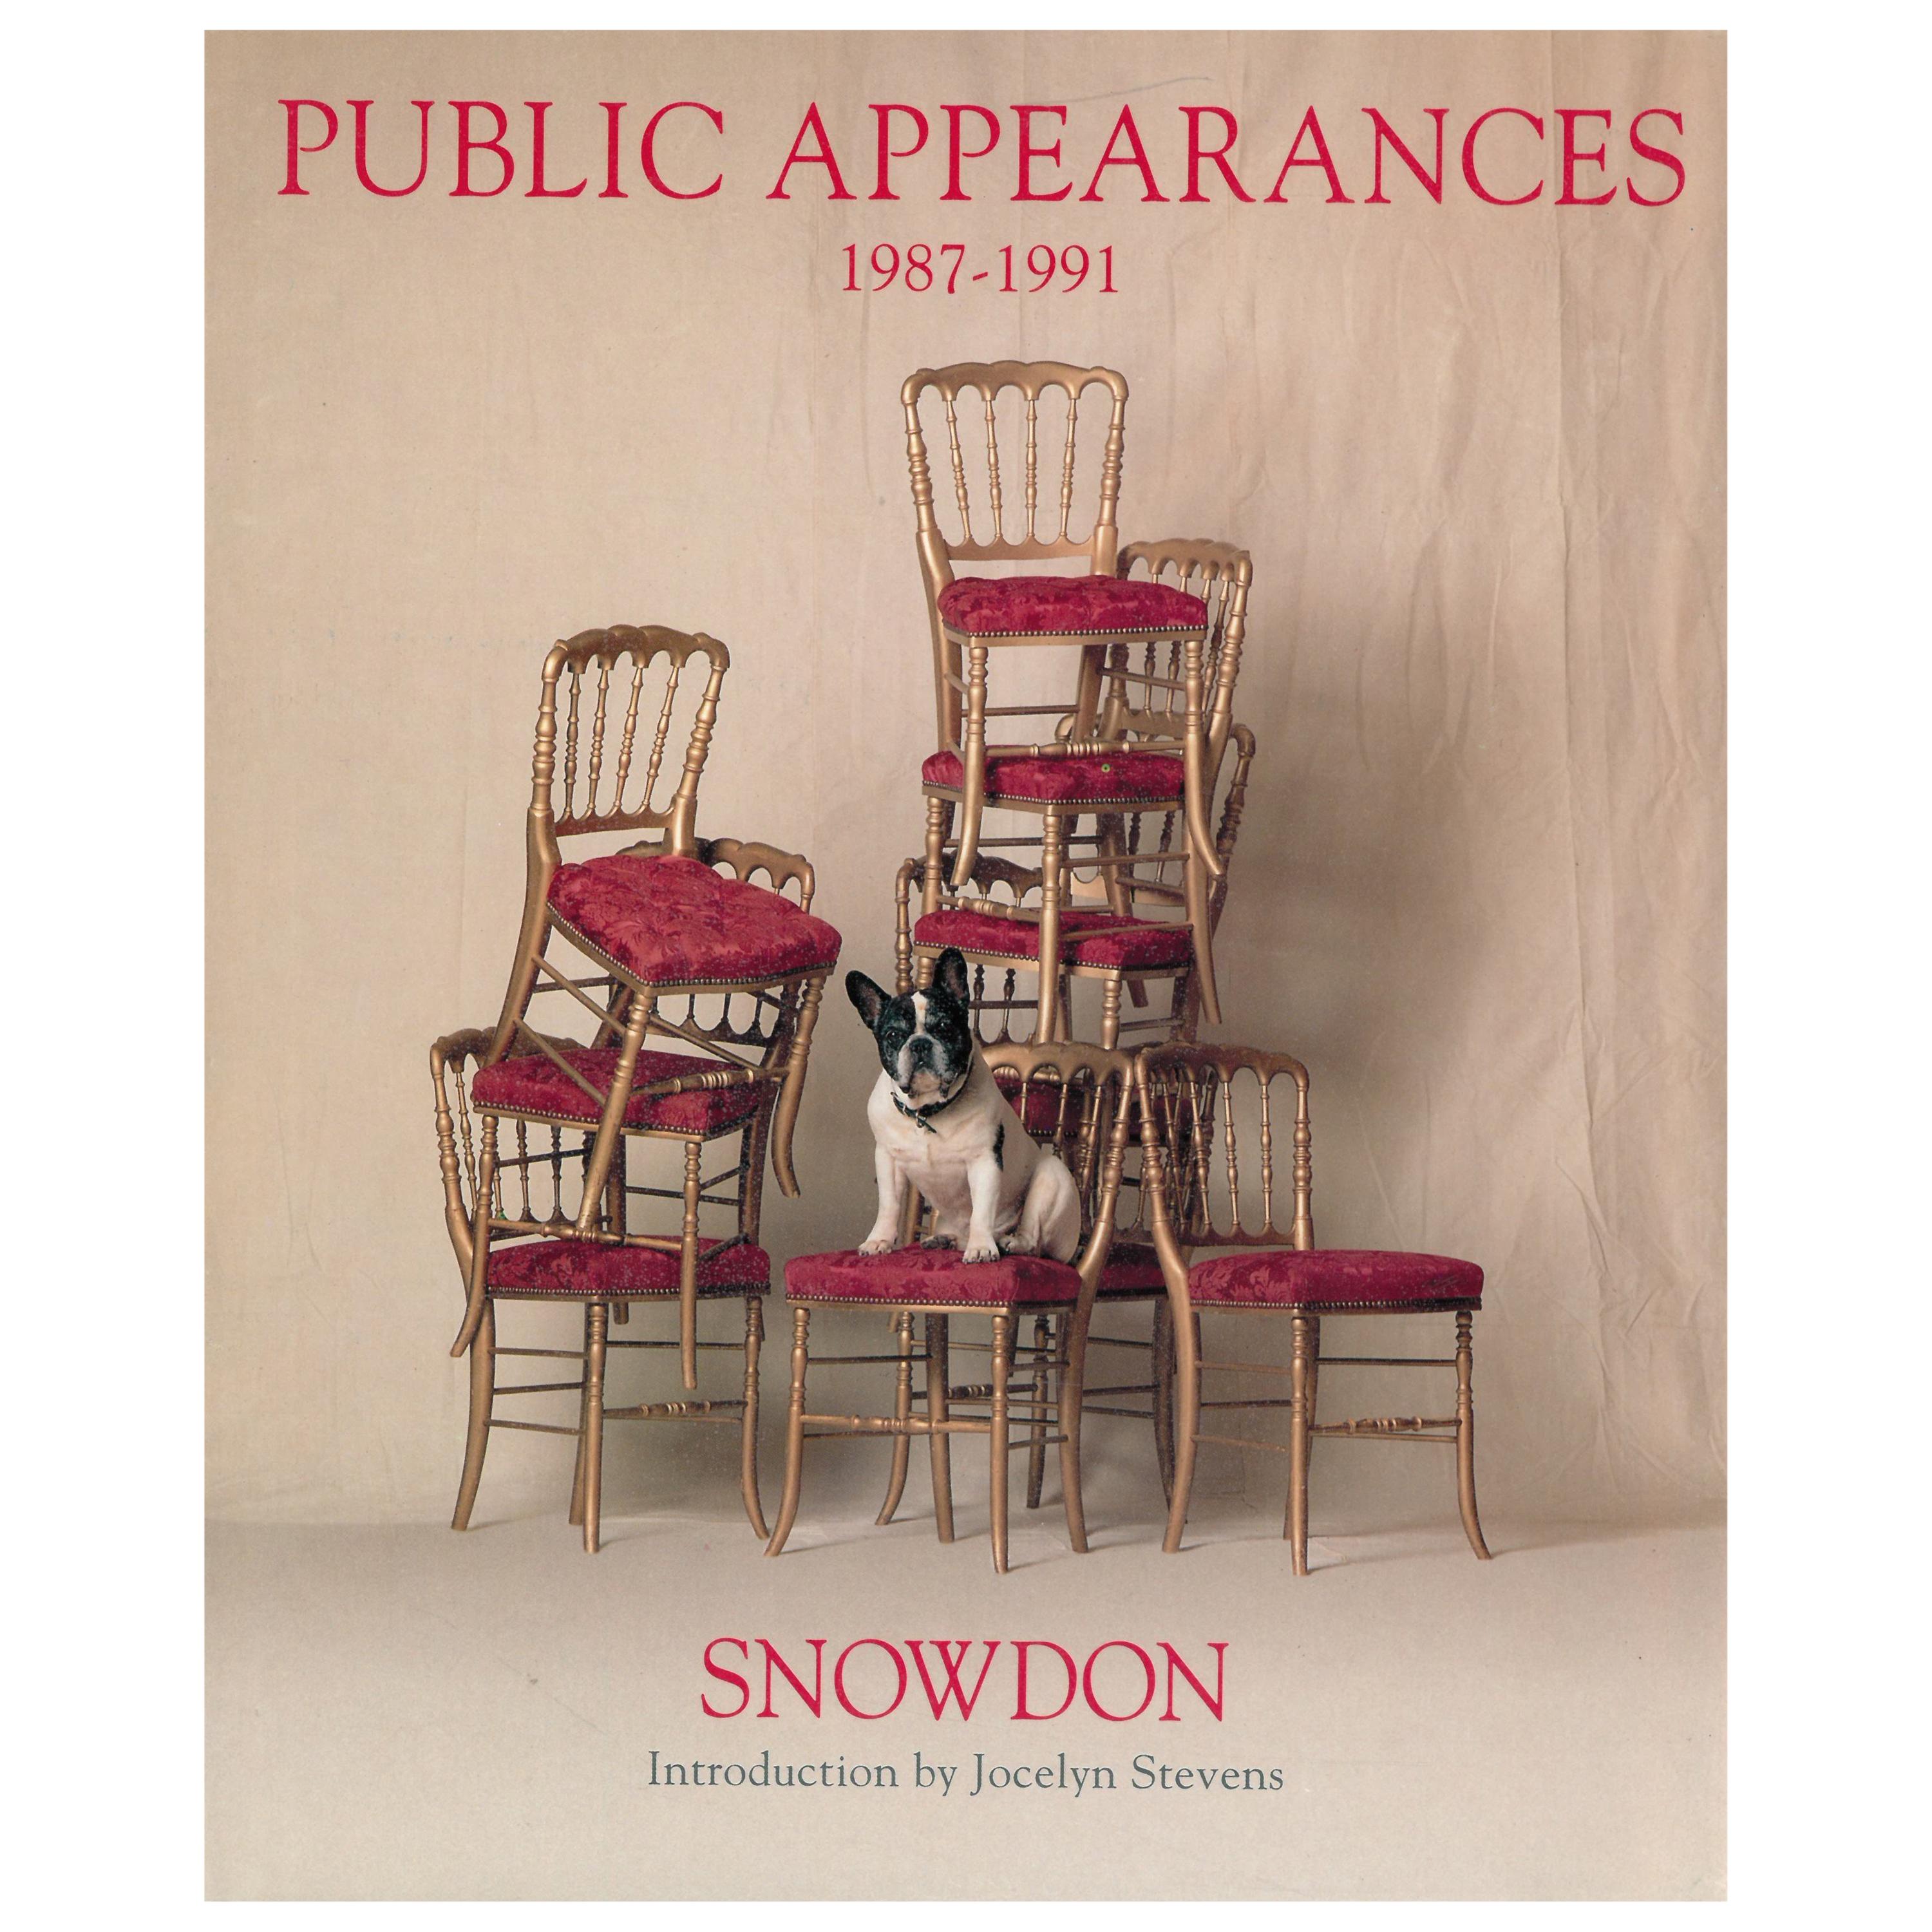 Public Appearances 1987-1991, a Book of Photographs by Lord Snowdon